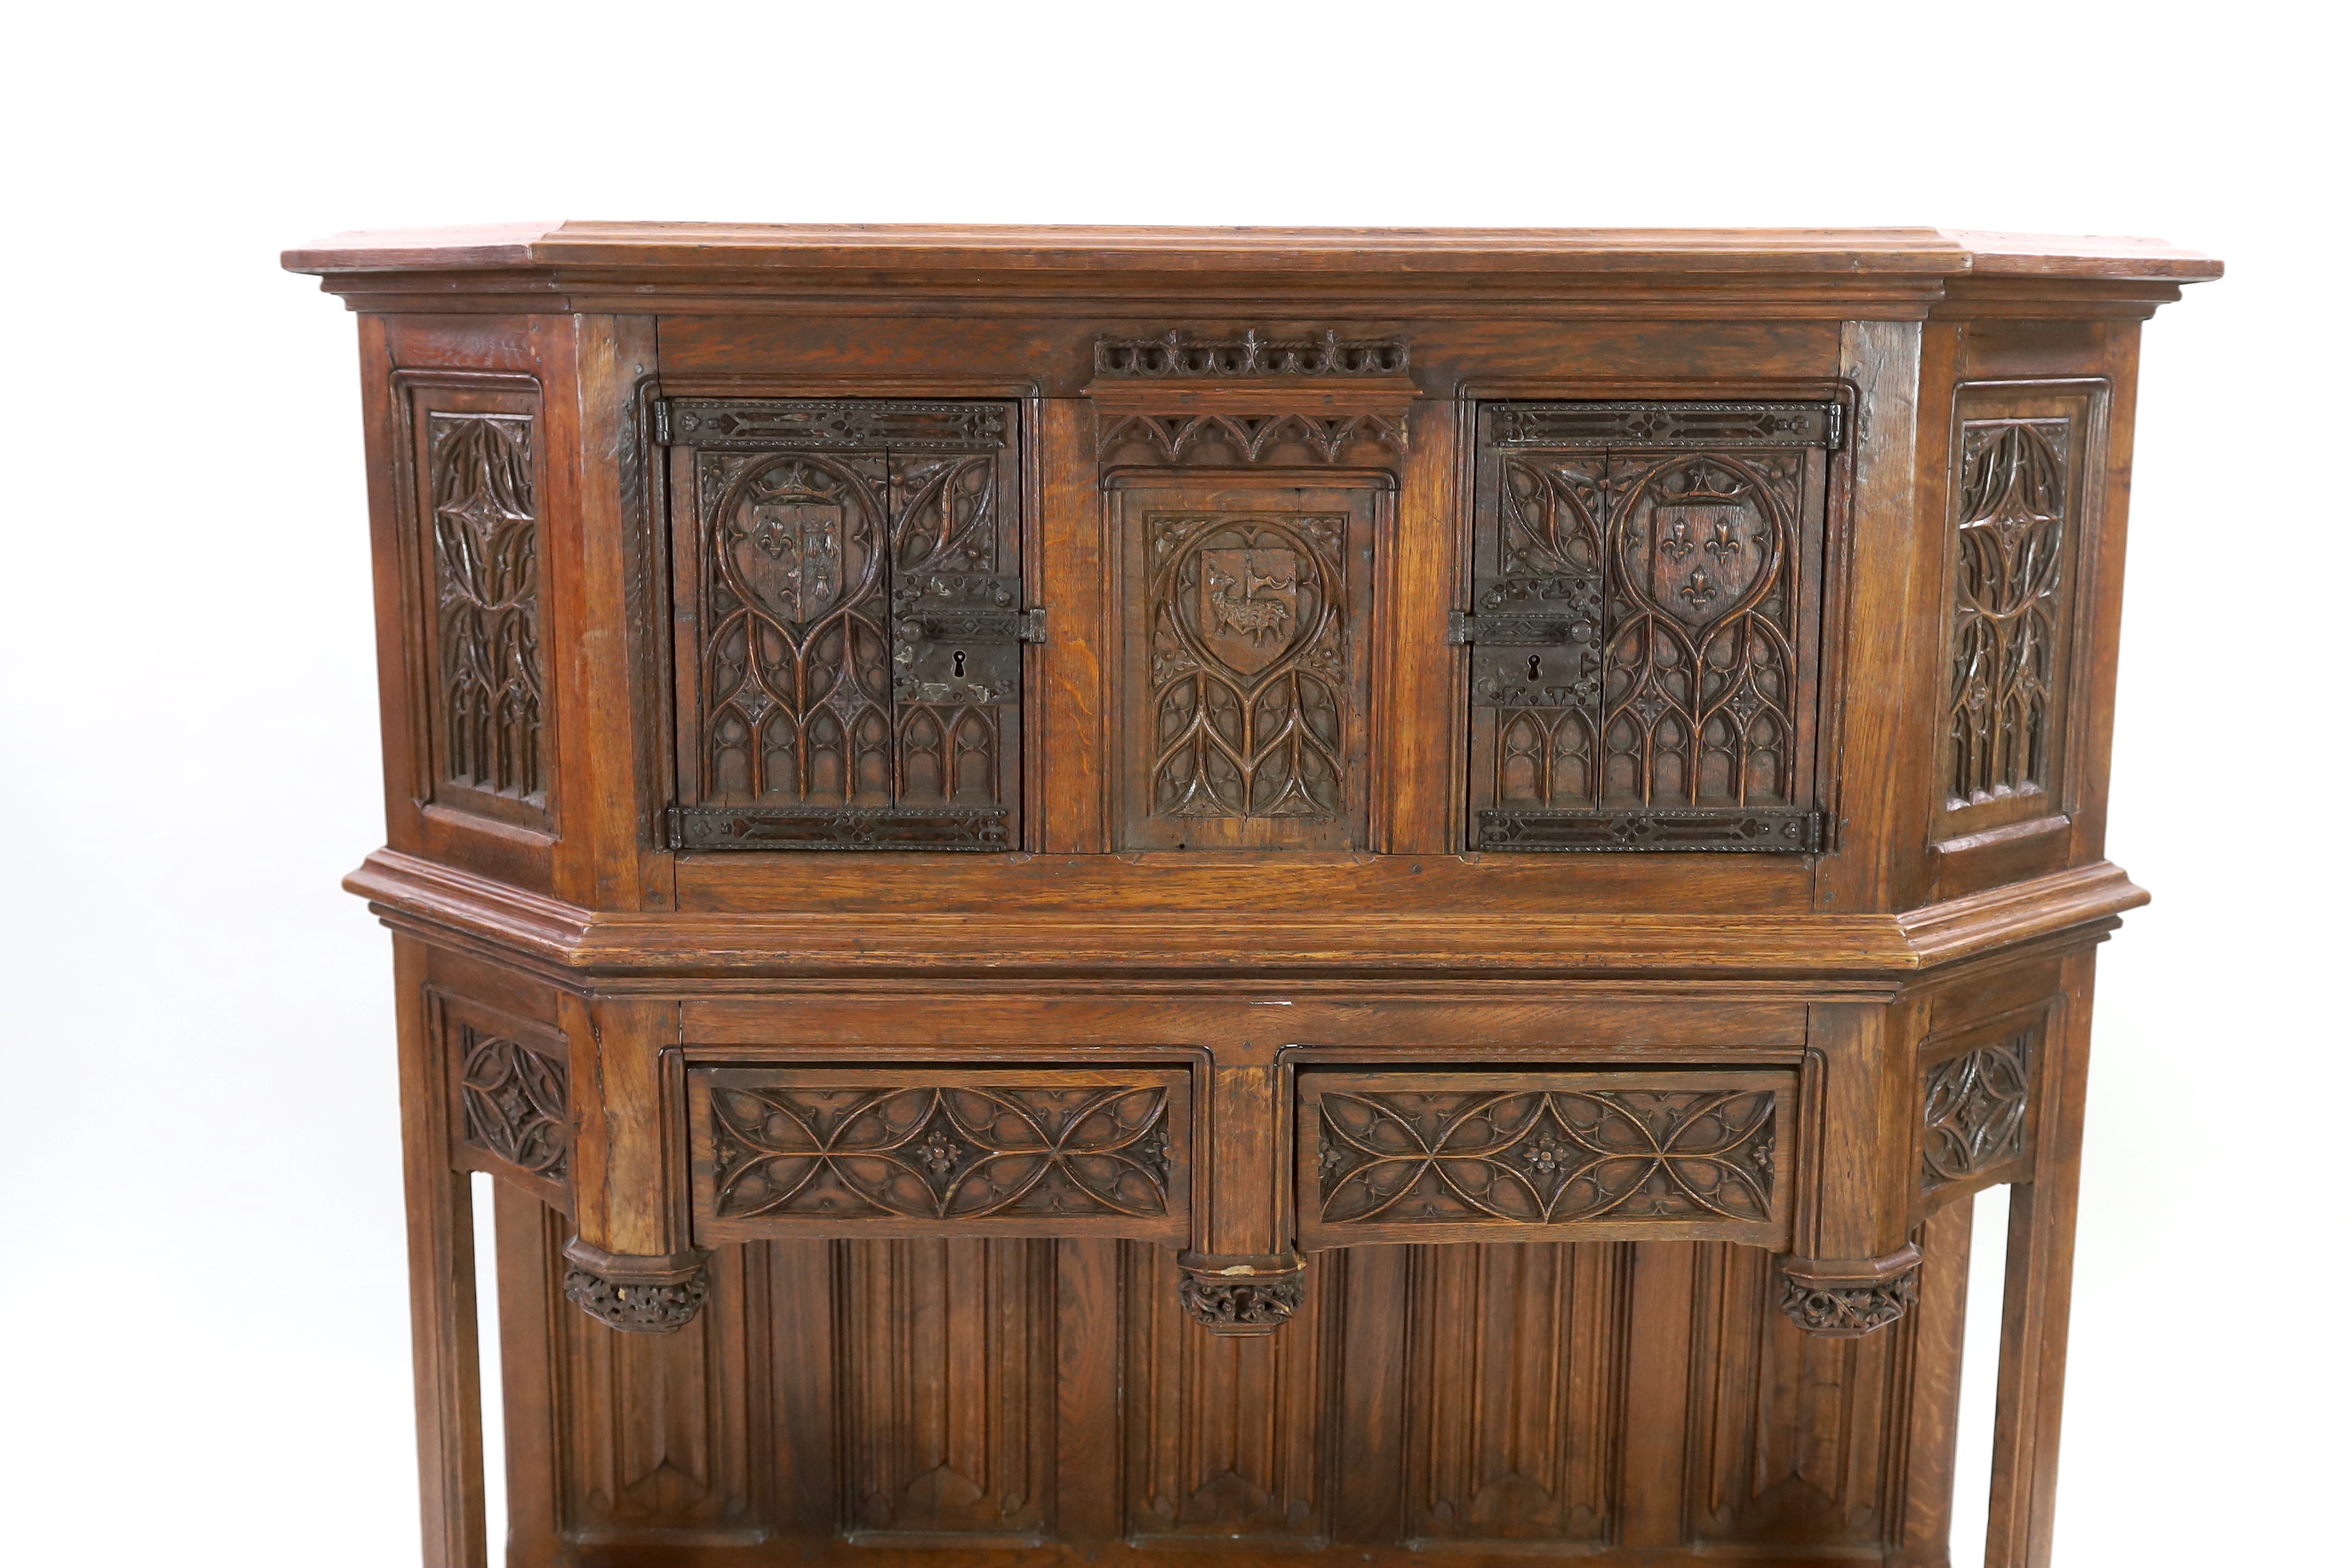 An antique oak dresser, based on a 15th century French gothic model and very similar to an example in the Wallace Collection